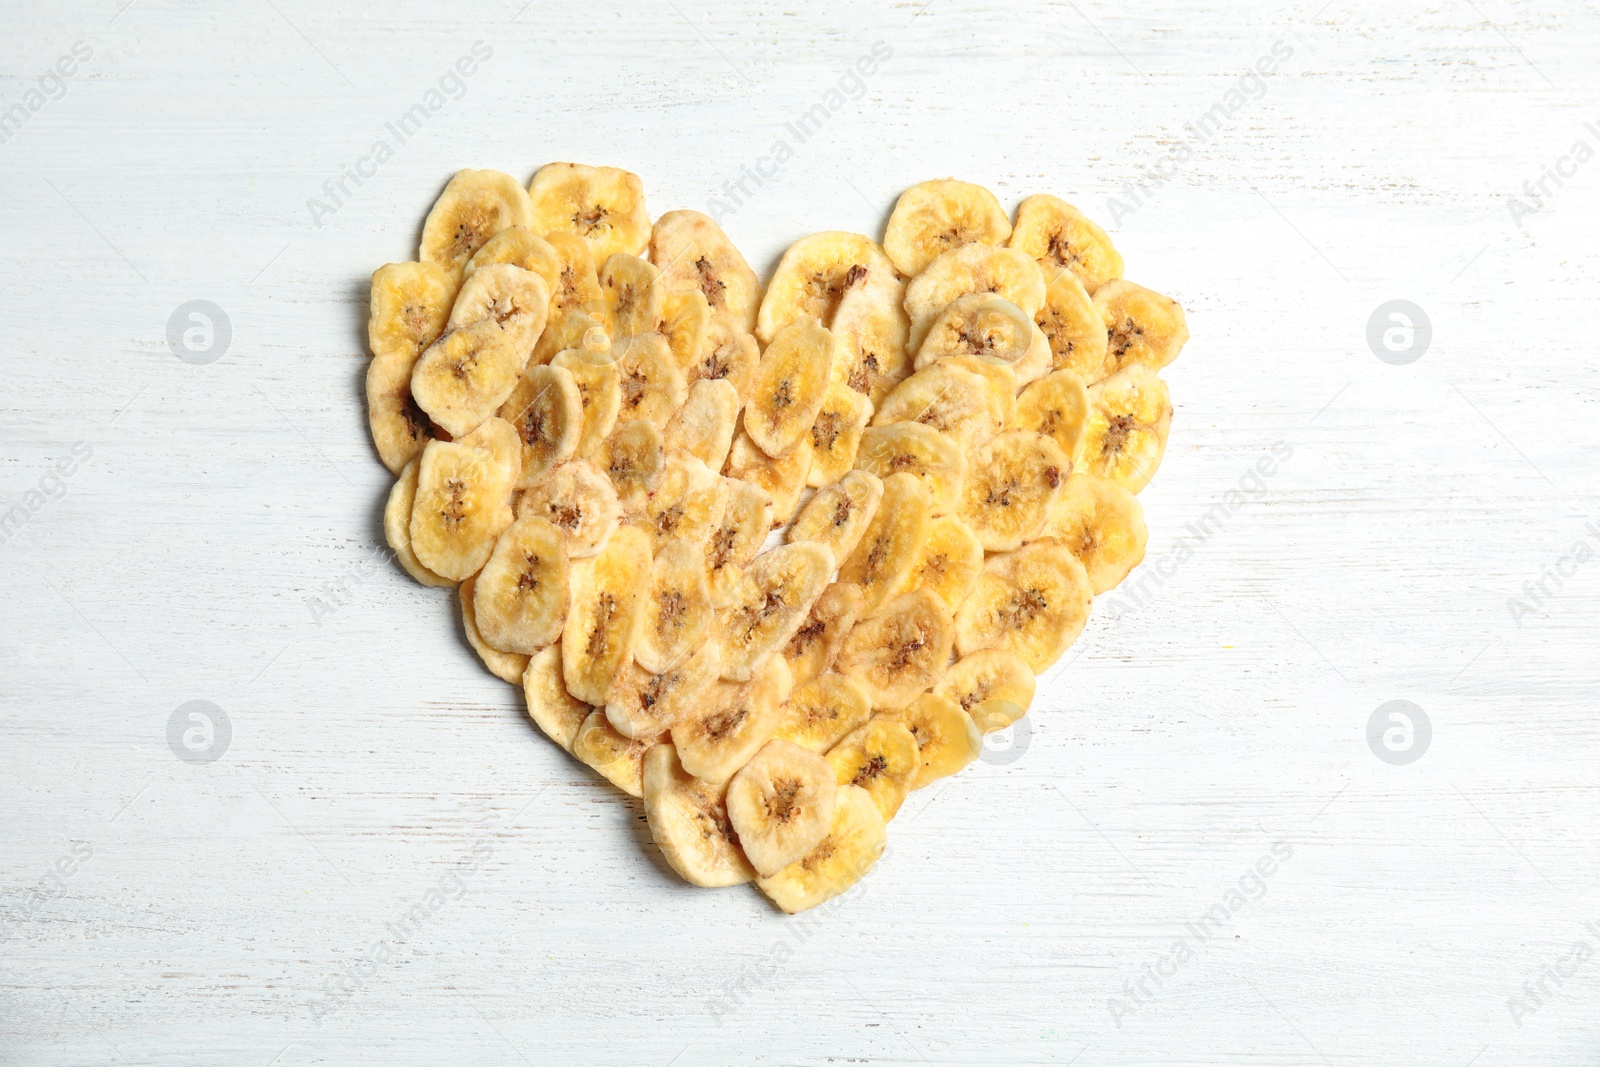 Photo of Heart shape made of sweet banana slices on wooden table, top view. Dried fruit as healthy snack